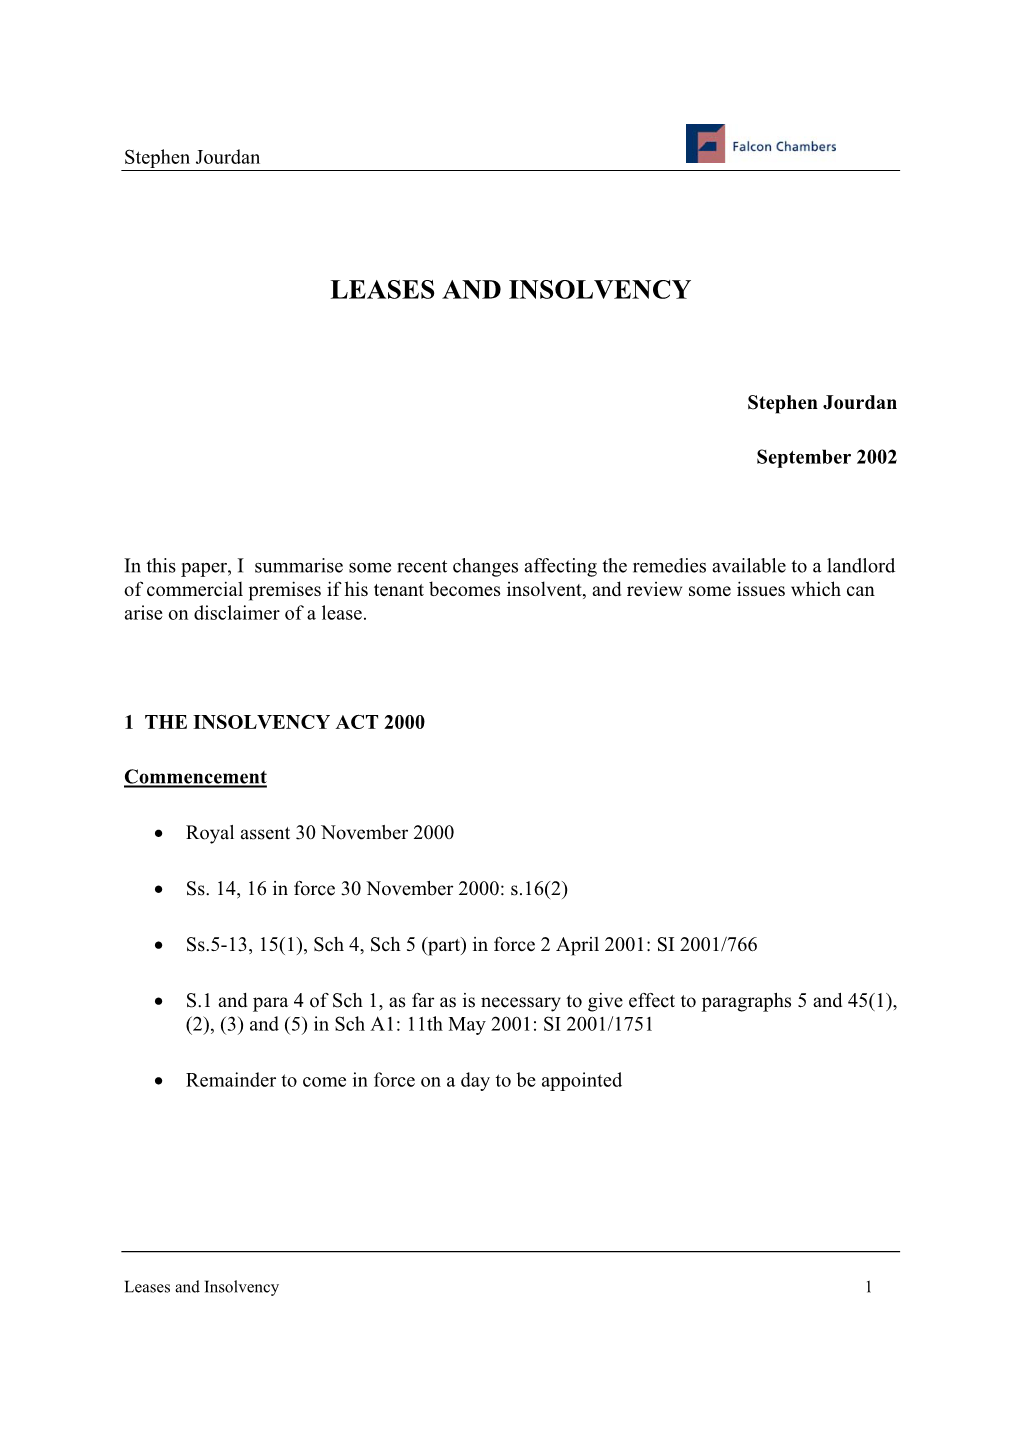 Download: Leases and Insolvency